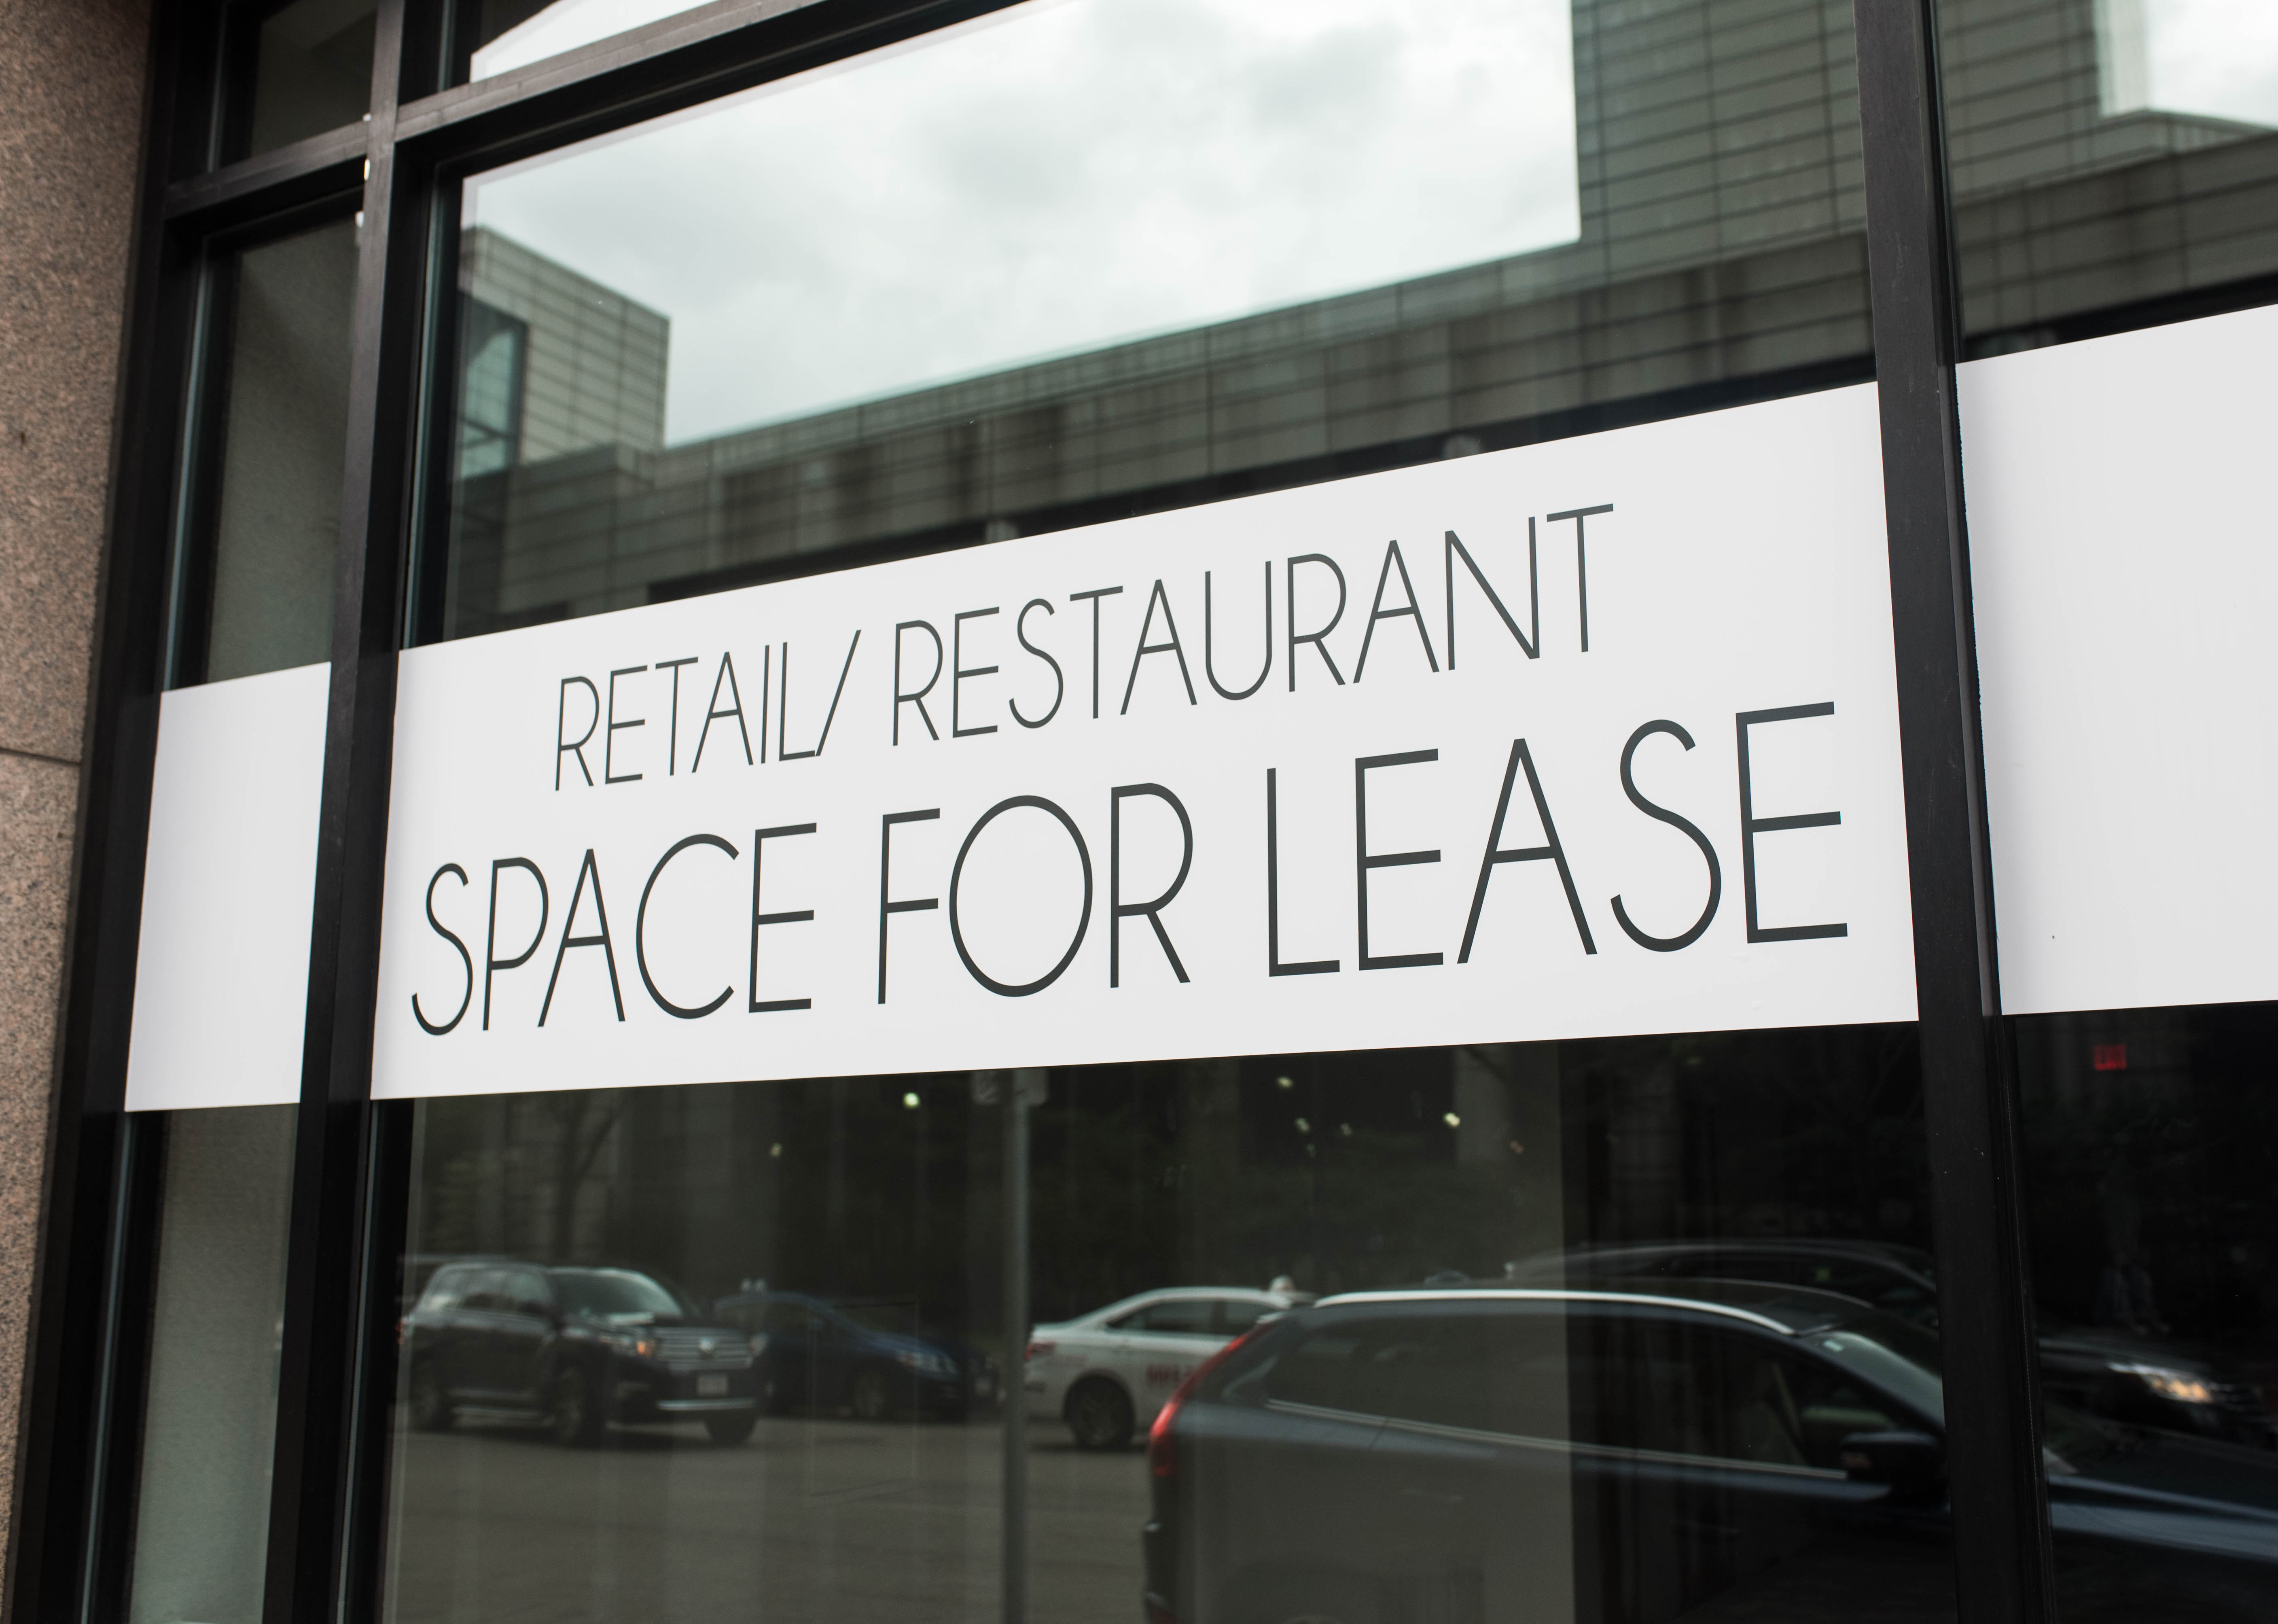 Space for Lease signage